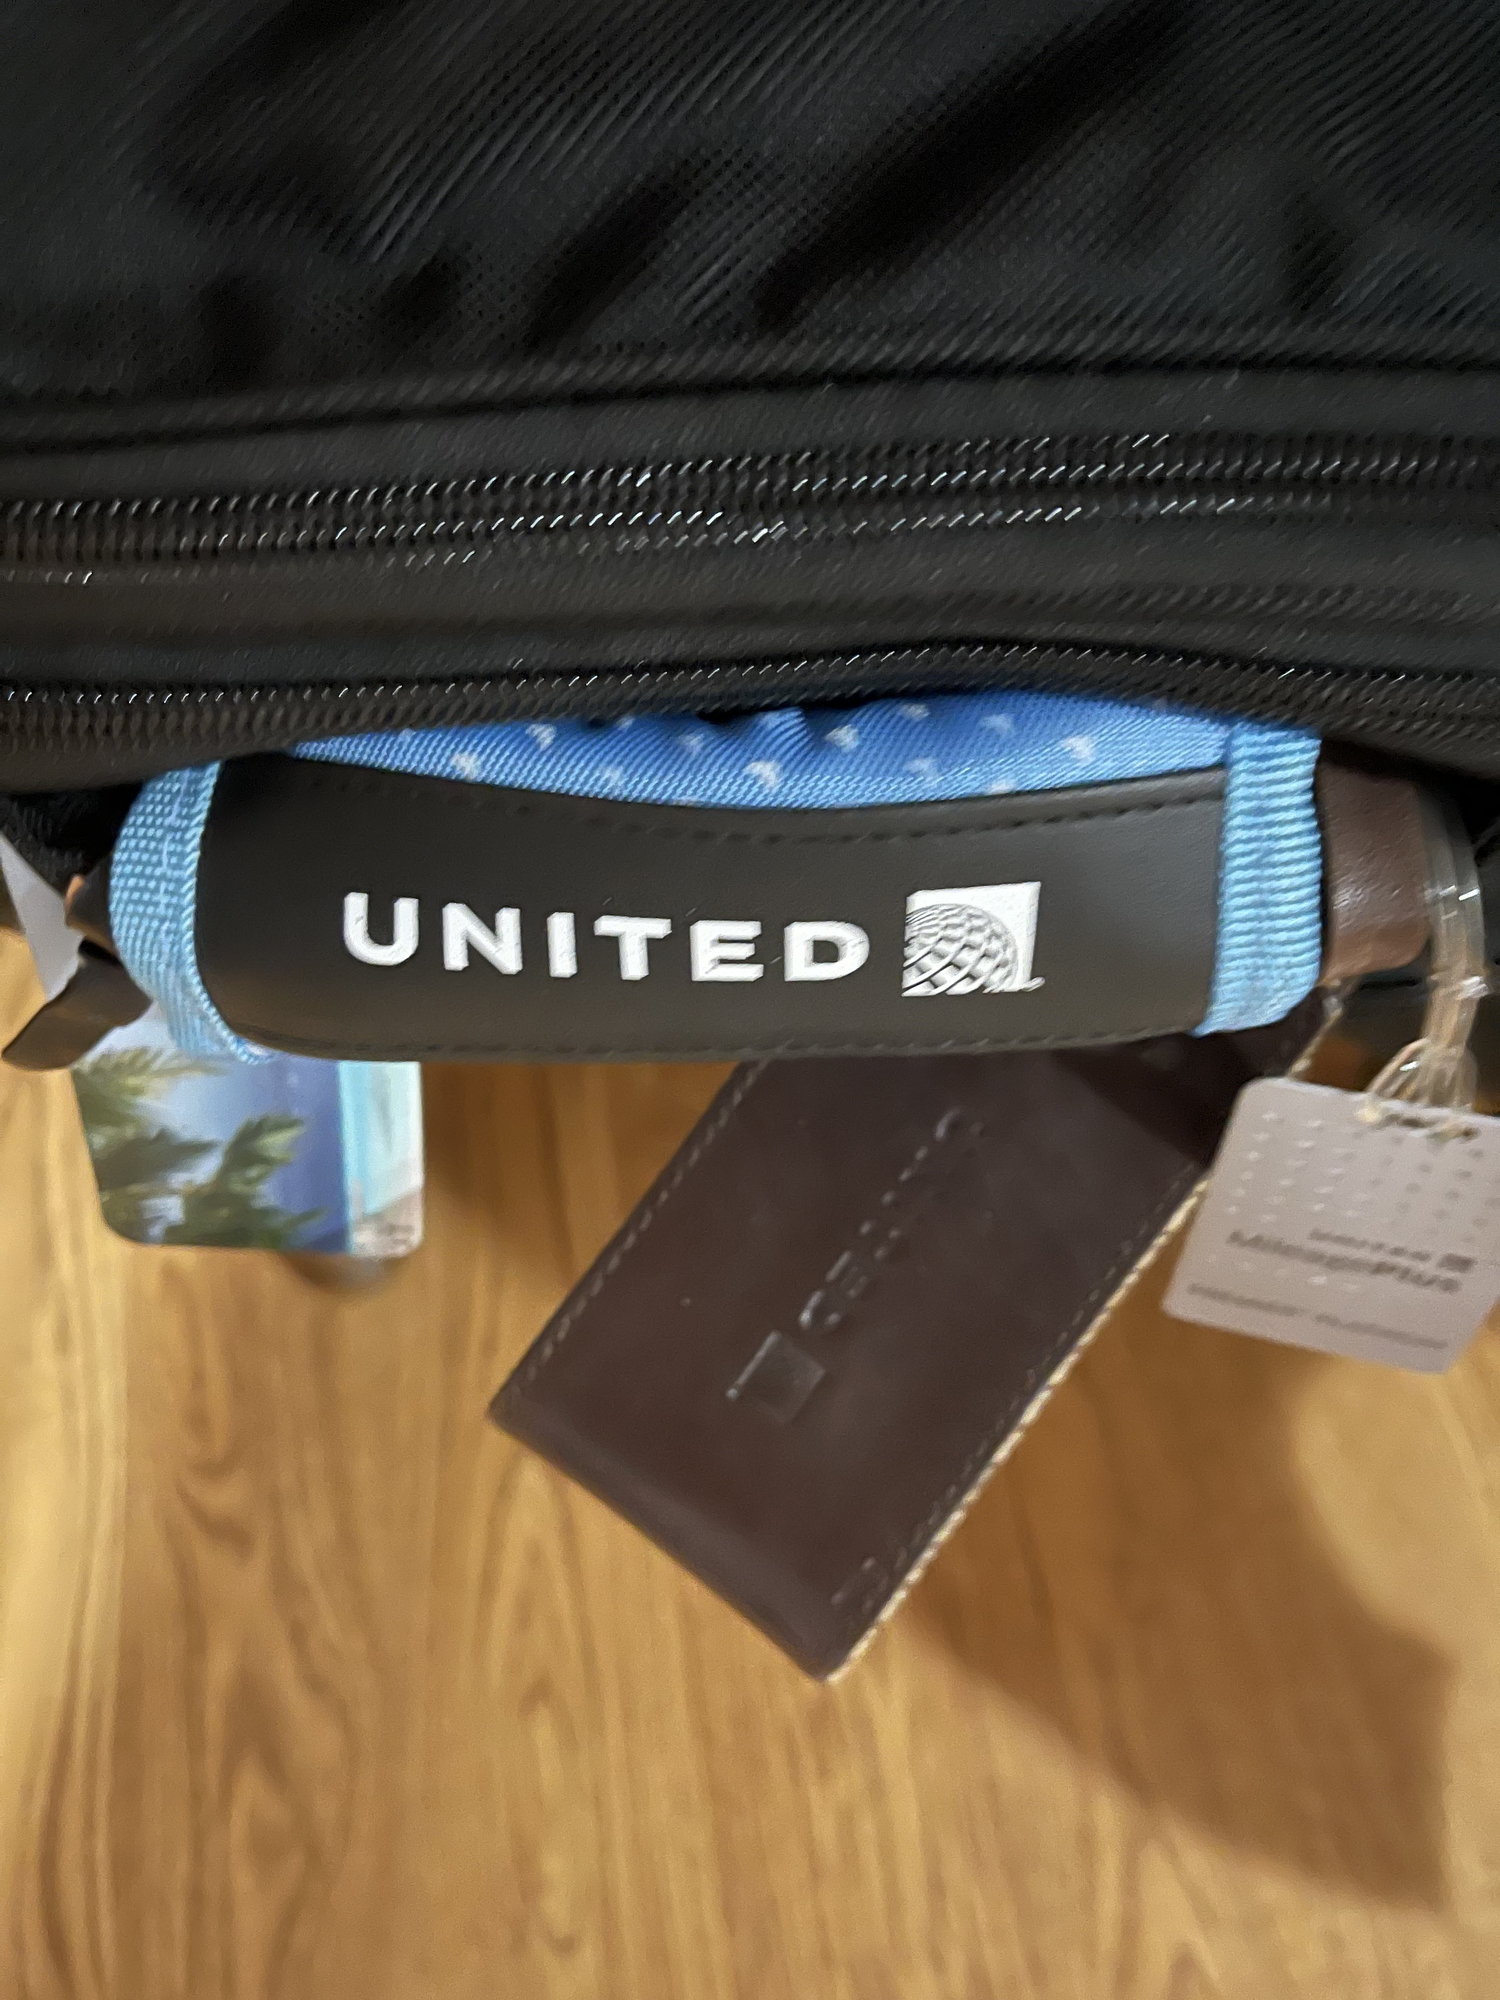 BRAND NEW!!! United Airlines 1K 2020 Blue Luggage Handle Wrap